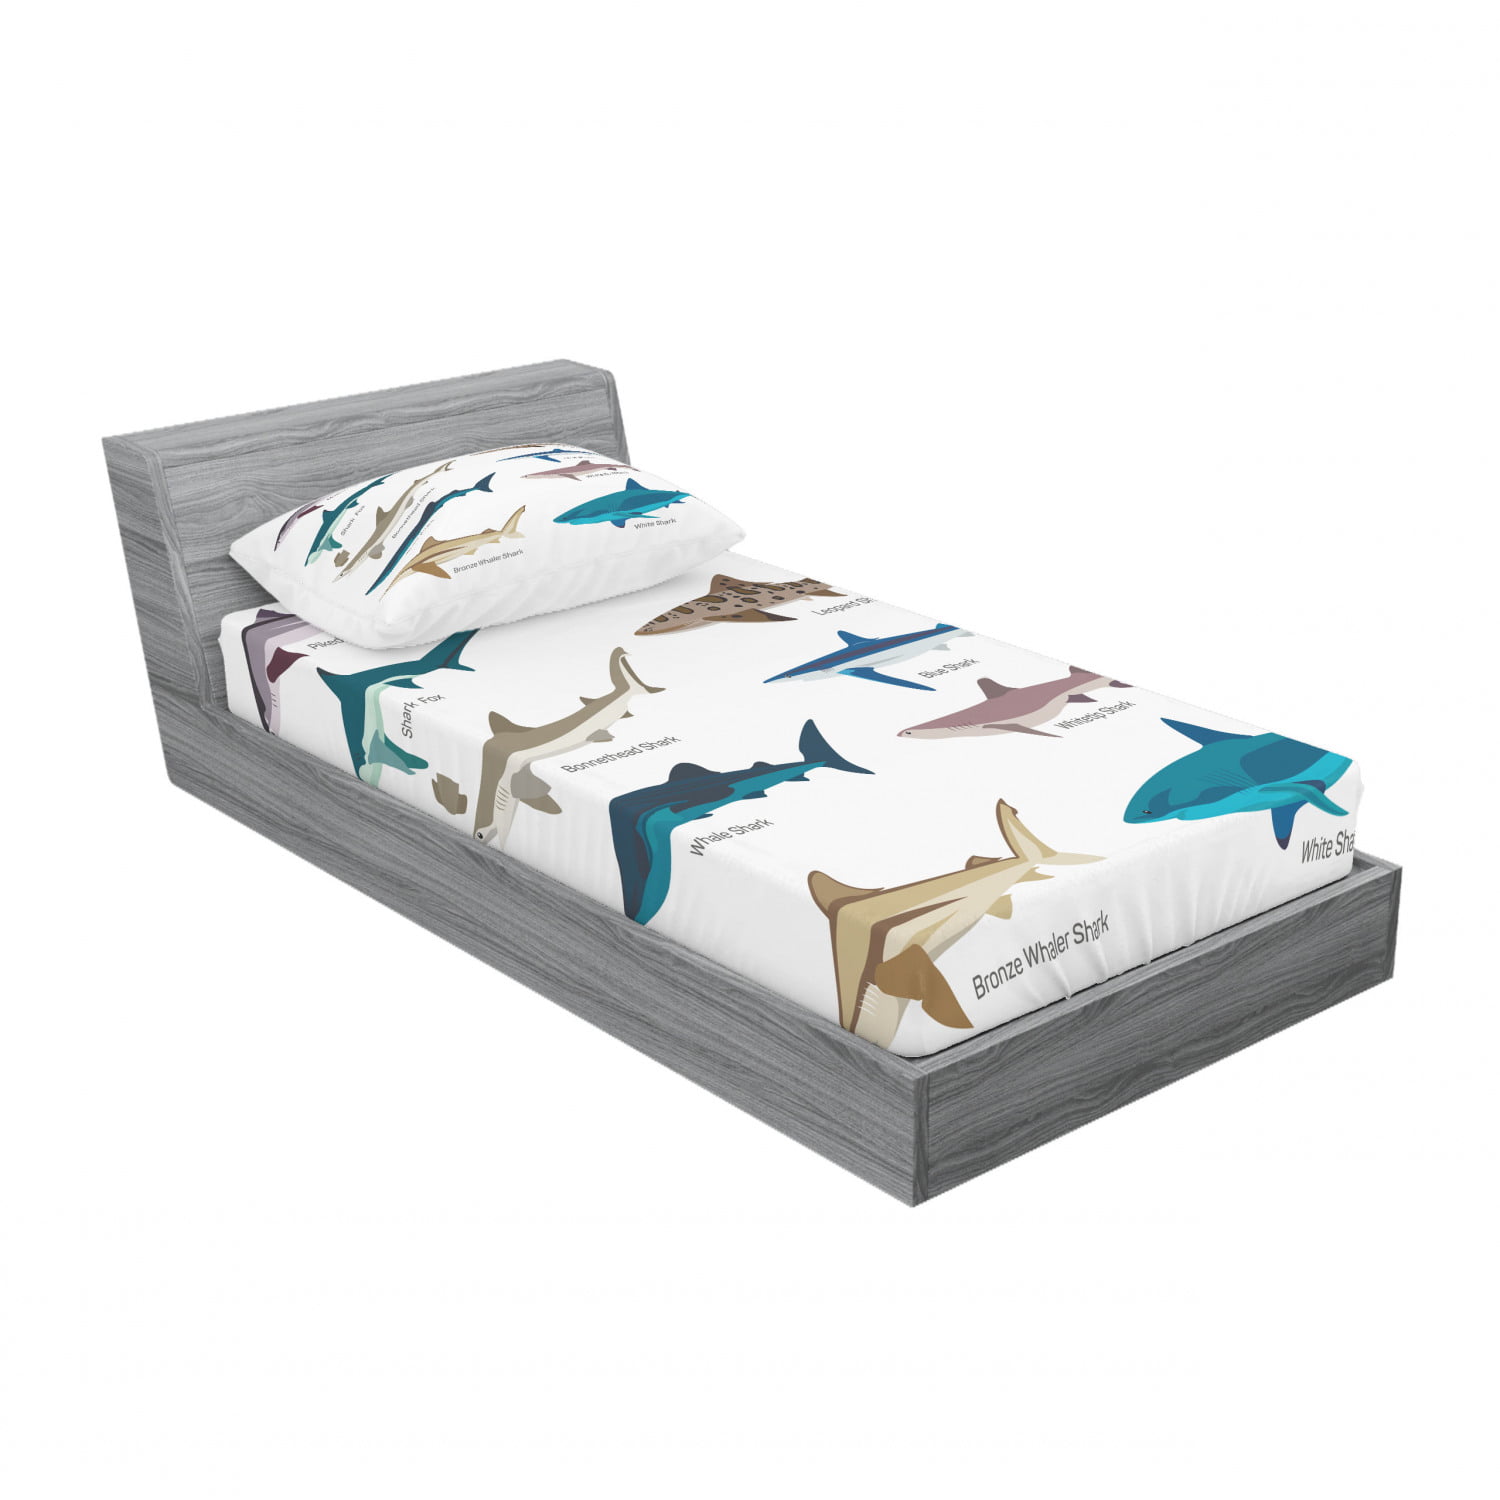 Shark Duvet Cover Set Include 1 Flat Sheet 1 Duvet Cover and 2 Pillow Cases Collection Types of Sharks Bronze Whaler Piked Dogfish Whlae Shark Maritime Design Twin XL Extra Long Bedding Set 